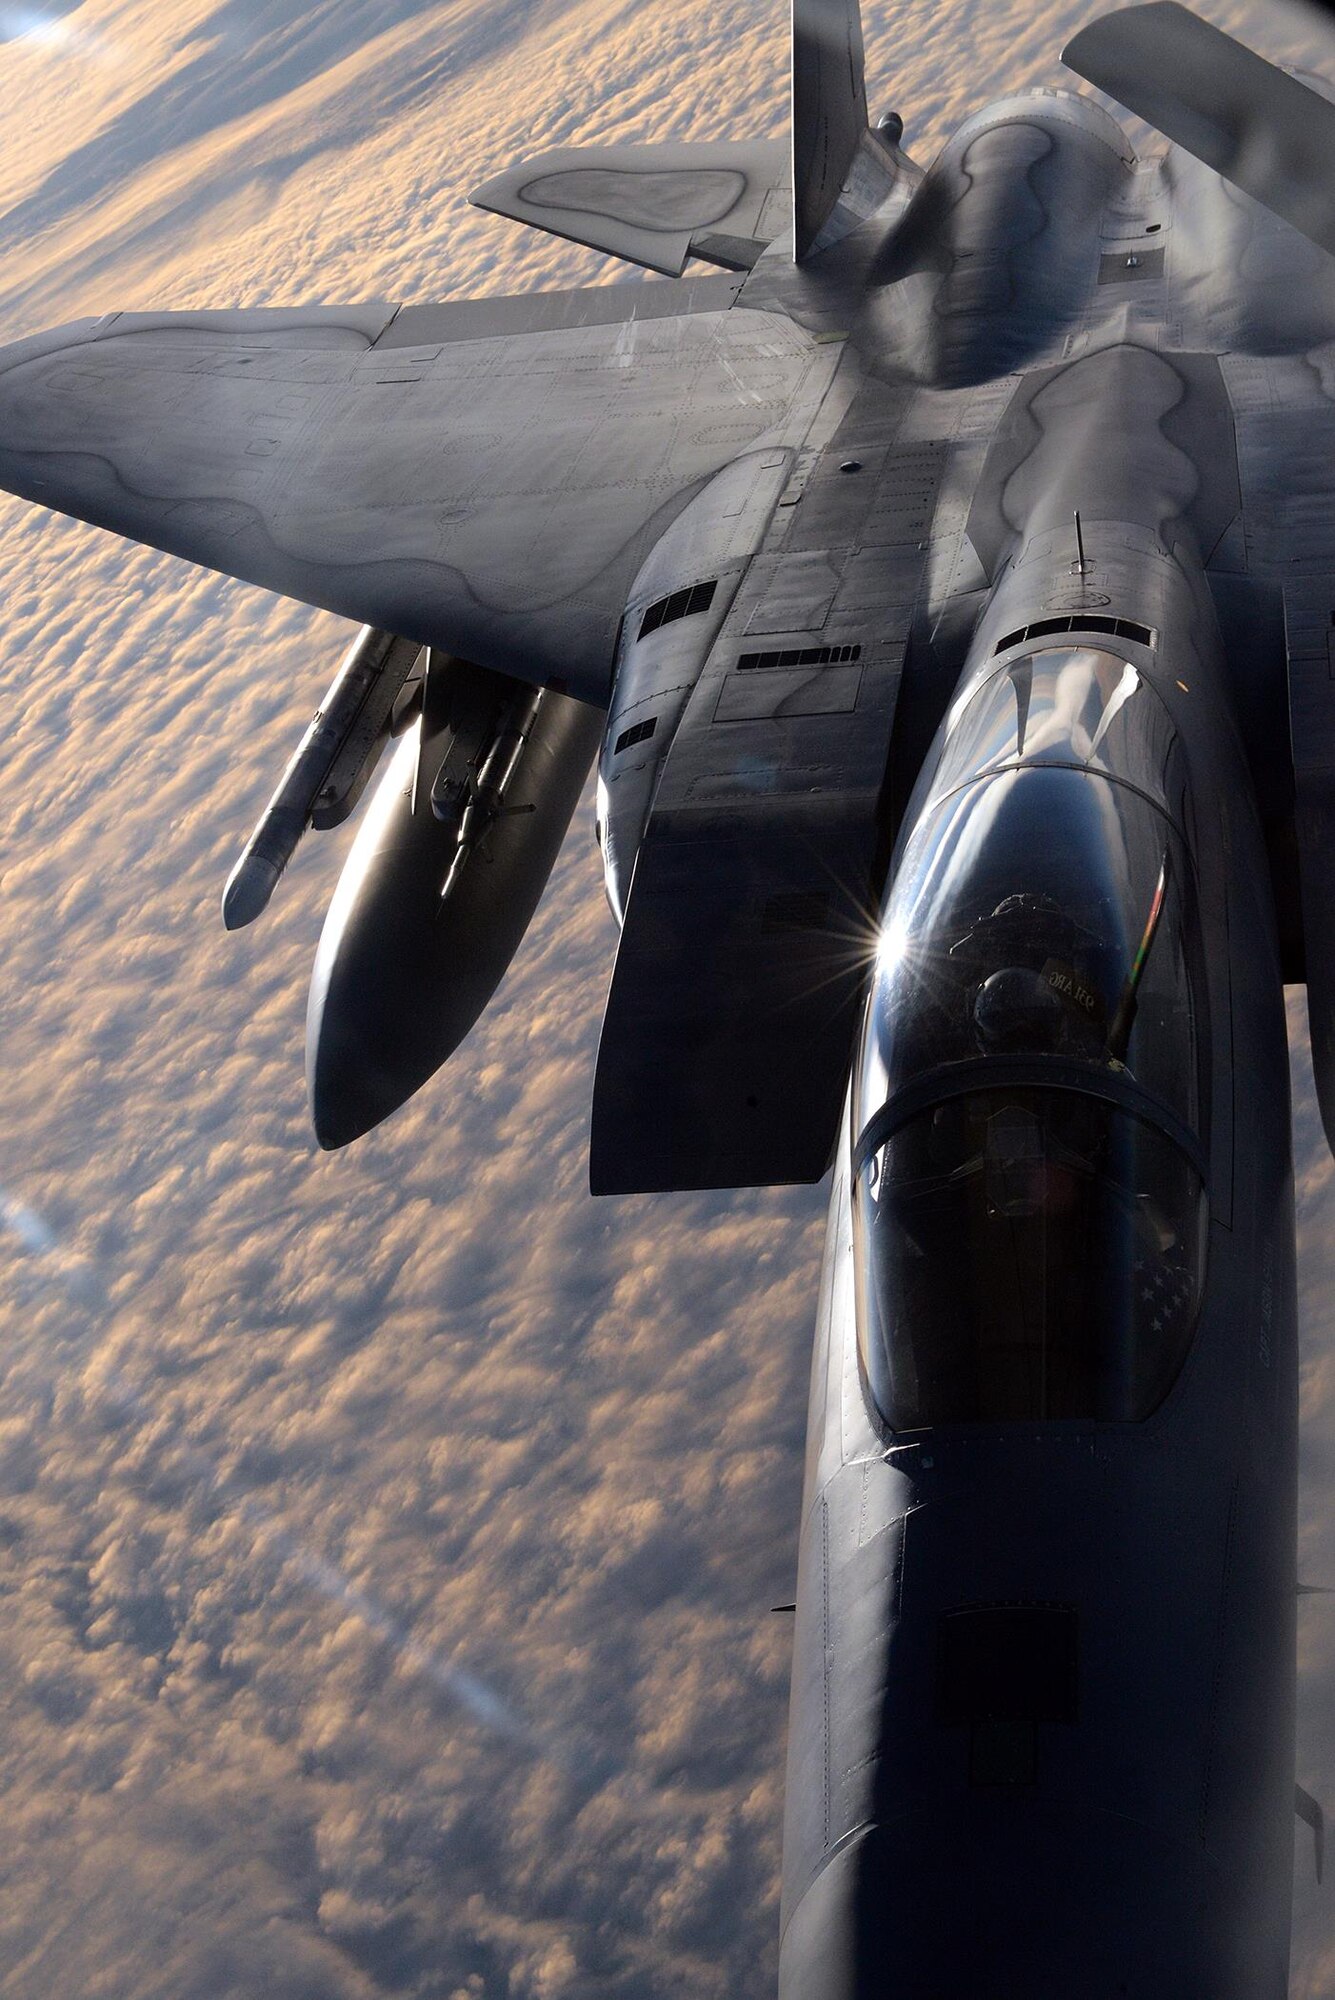 A U.S. Air Force F-15 Eagle assigned to the 44th Fighter Squadron out of Kadena Air Base, Japan, connects with a KC-135 Stratotanker out of McConnell Air Force Base, Kan., Oct. 10, 2016, during a RED FLAG-Alaska (RF-A) 17-1 mission. RF-A exercises enable joint and international units to sharpen their skills by flying simulated combat sorties in a realistic threat environment inside the Joint Pacific Alaska Range Complex, the largest instrumented air, ground and electronic combat training range in the world. (U.S. Air Force photo by Master Sgt. Karen J. Tomasik)